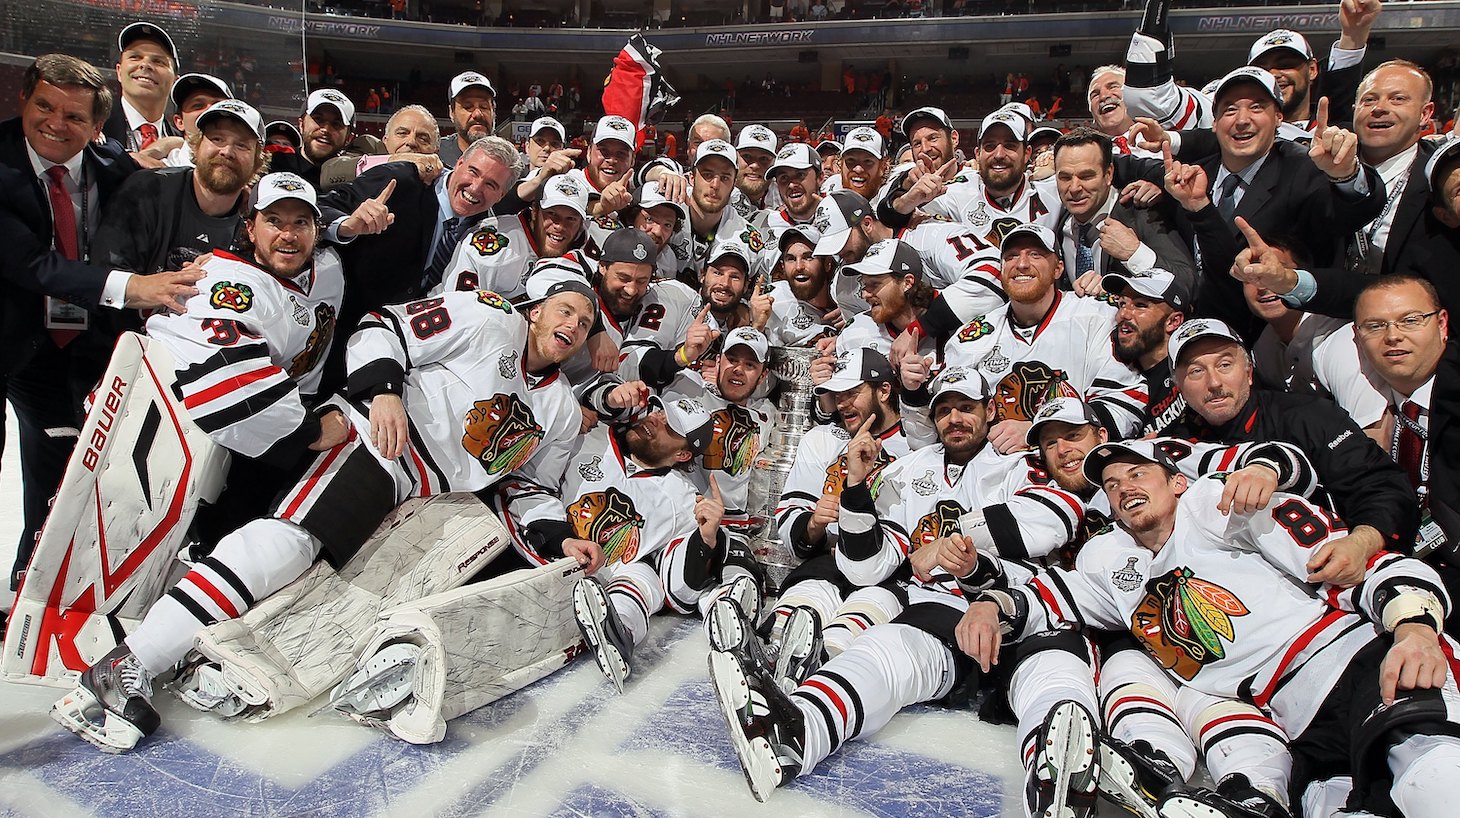 PHILADELPHIA - JUNE 09: The Chicago Blackhawks pose for a team photo after defeating the Philadelphia Flyers 4-3 in overtime and win the Stanley Cup in Game Six of the 2010 NHL Stanley Cup Final at the Wachovia Center on June 9, 2010 in Philadelphia, Pennsylvania. (Photo by Jim McIsaac/Getty Images)